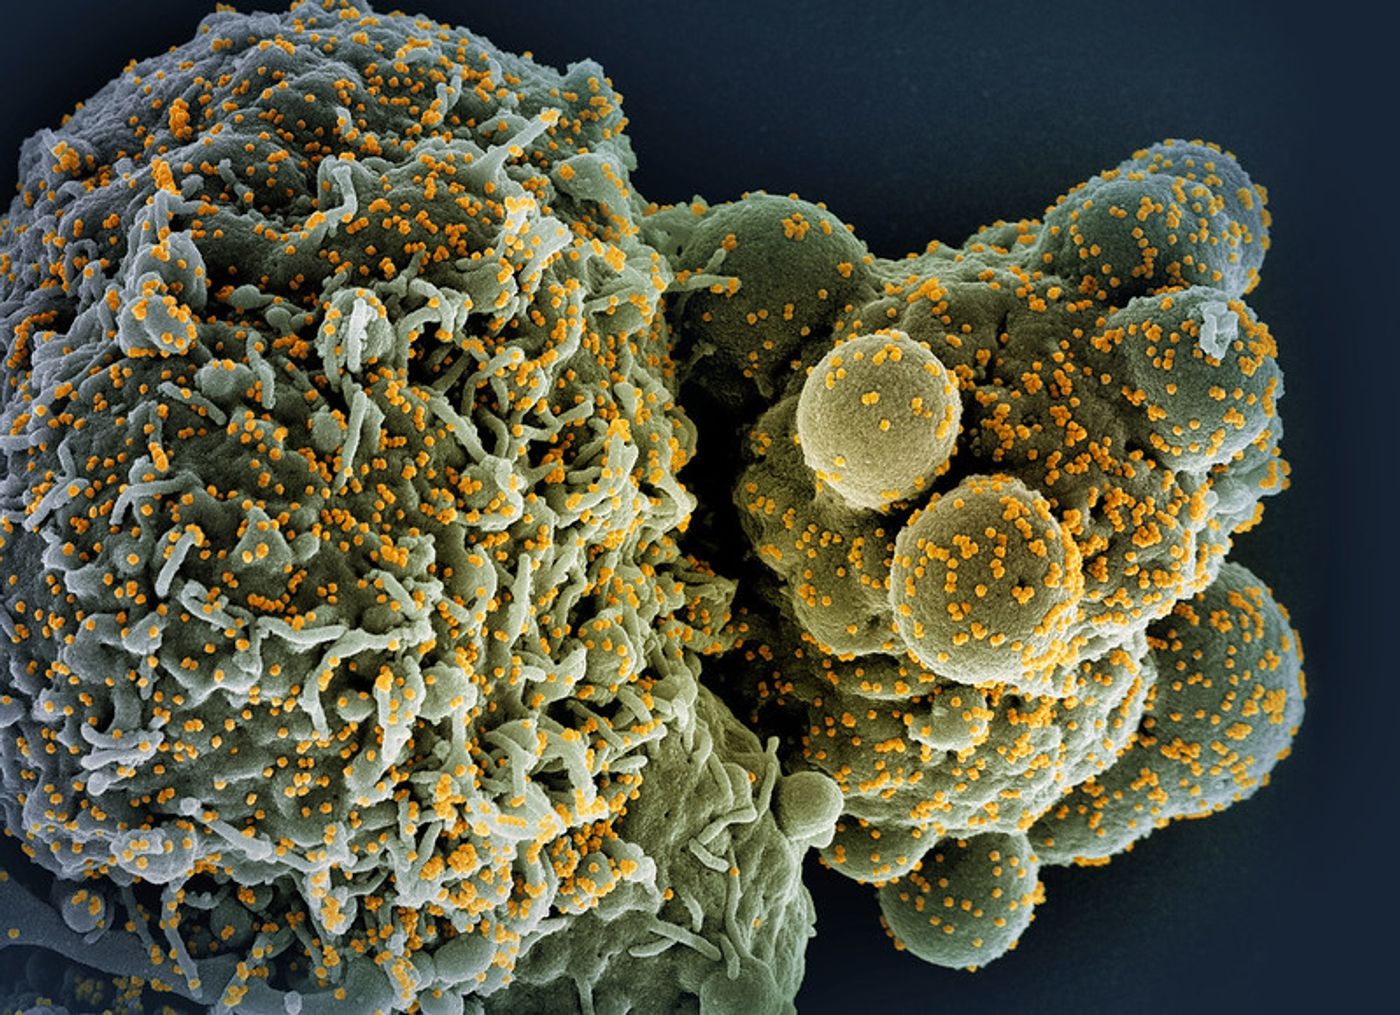 Colorized scanning electron micrograph of a cell (green) infected with the Omicron strain of SARS-CoV-2 virus particles (gold), isolated from a patient sample. Image captured at the NIAID Integrated Research Facility (IRF) in Fort Detrick, Maryland. Credit: NIAID